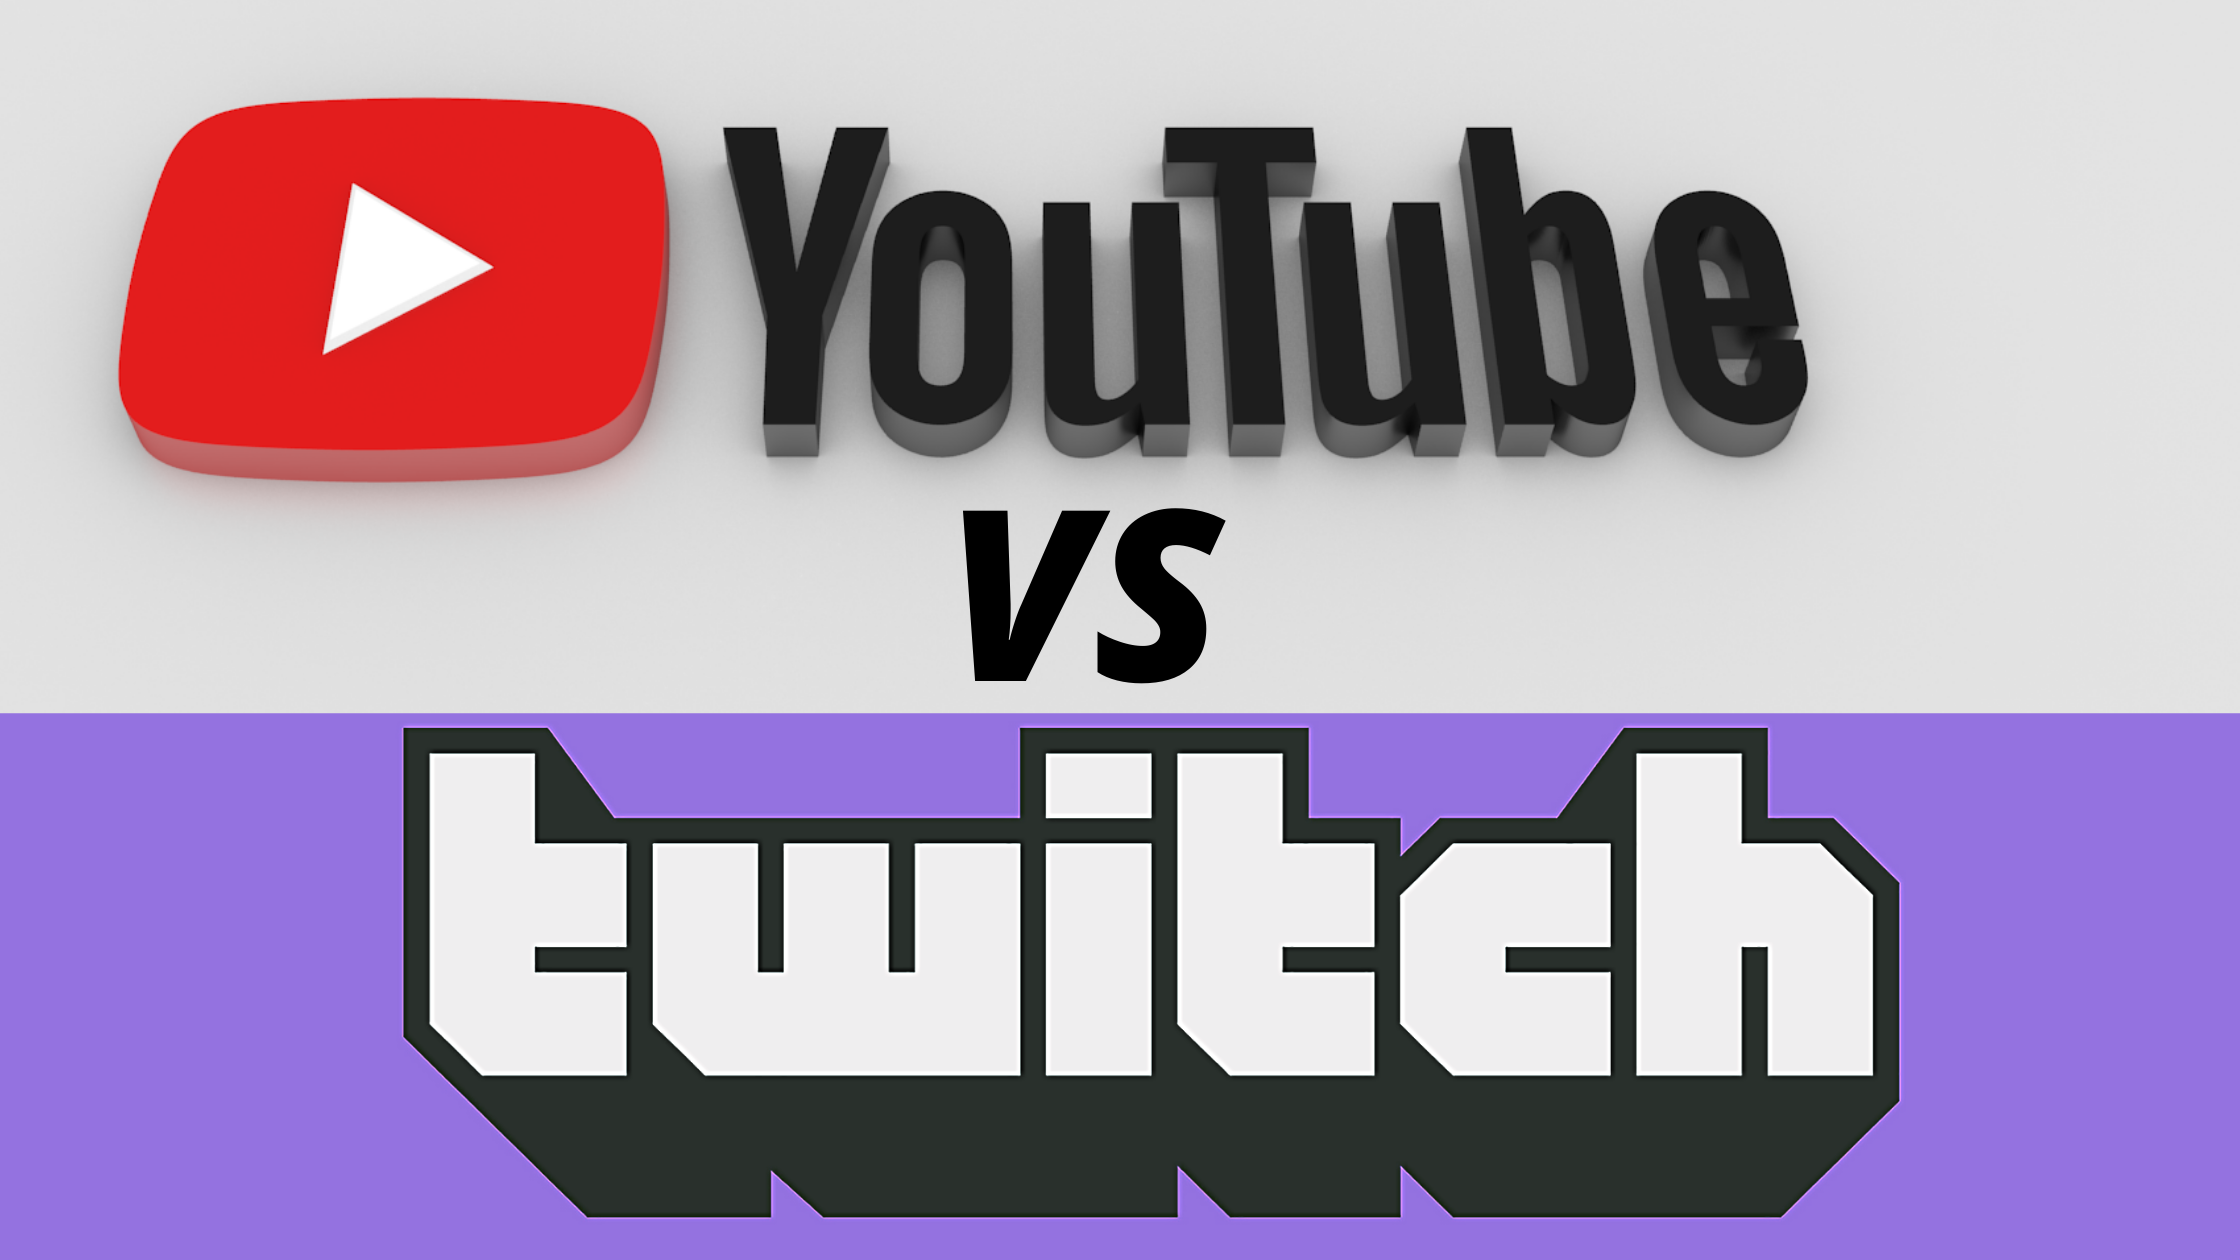 YouTube vs. Twitch: Which is the Best Live Streaming Platform?